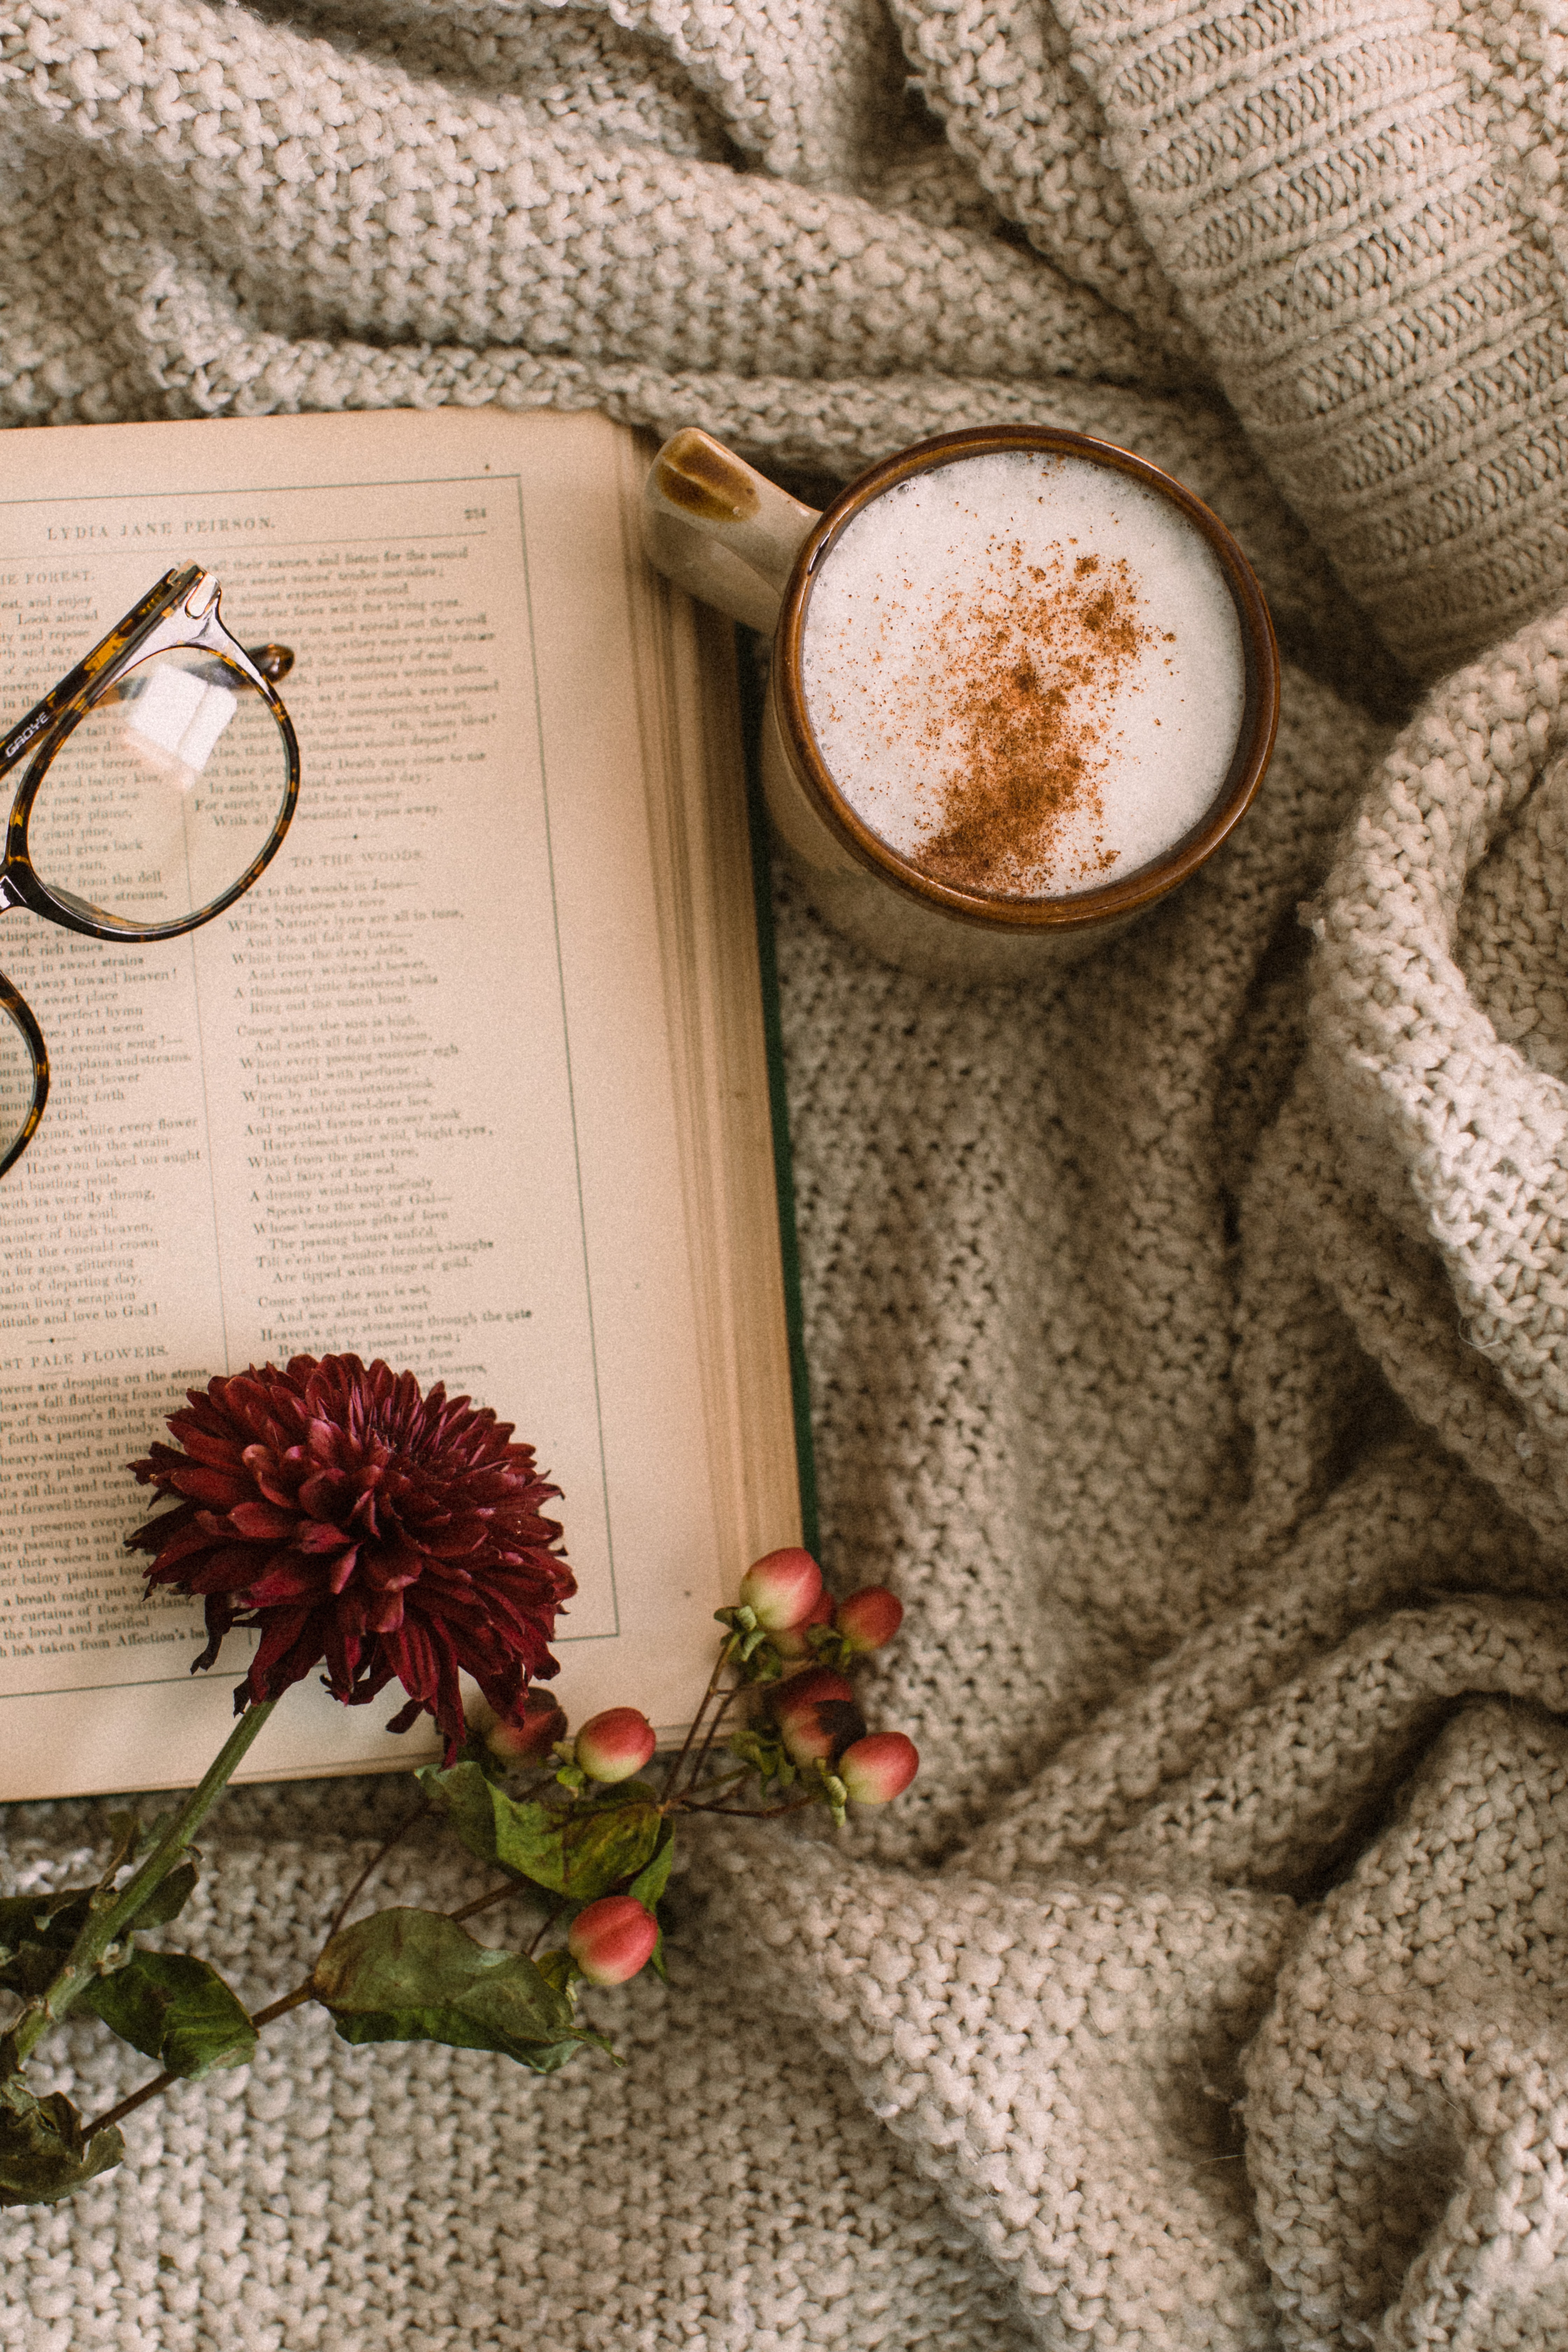 book, food, cup, spectacles, flowers, coffee, cappuccino, glasses, mug cellphone